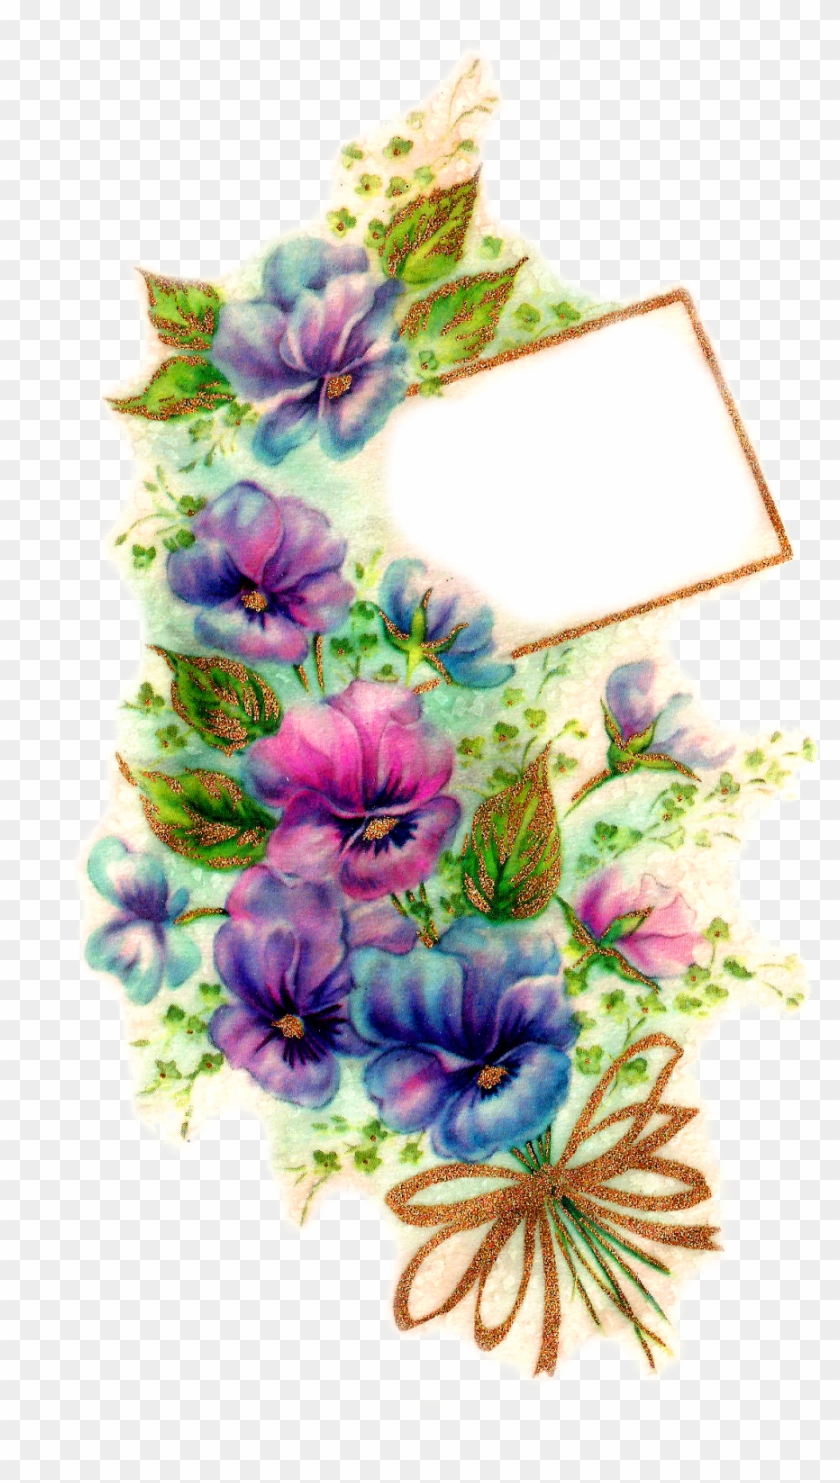 The First Digital Pansy Image Is A Very Lovely Blank - Clip Art #1137857